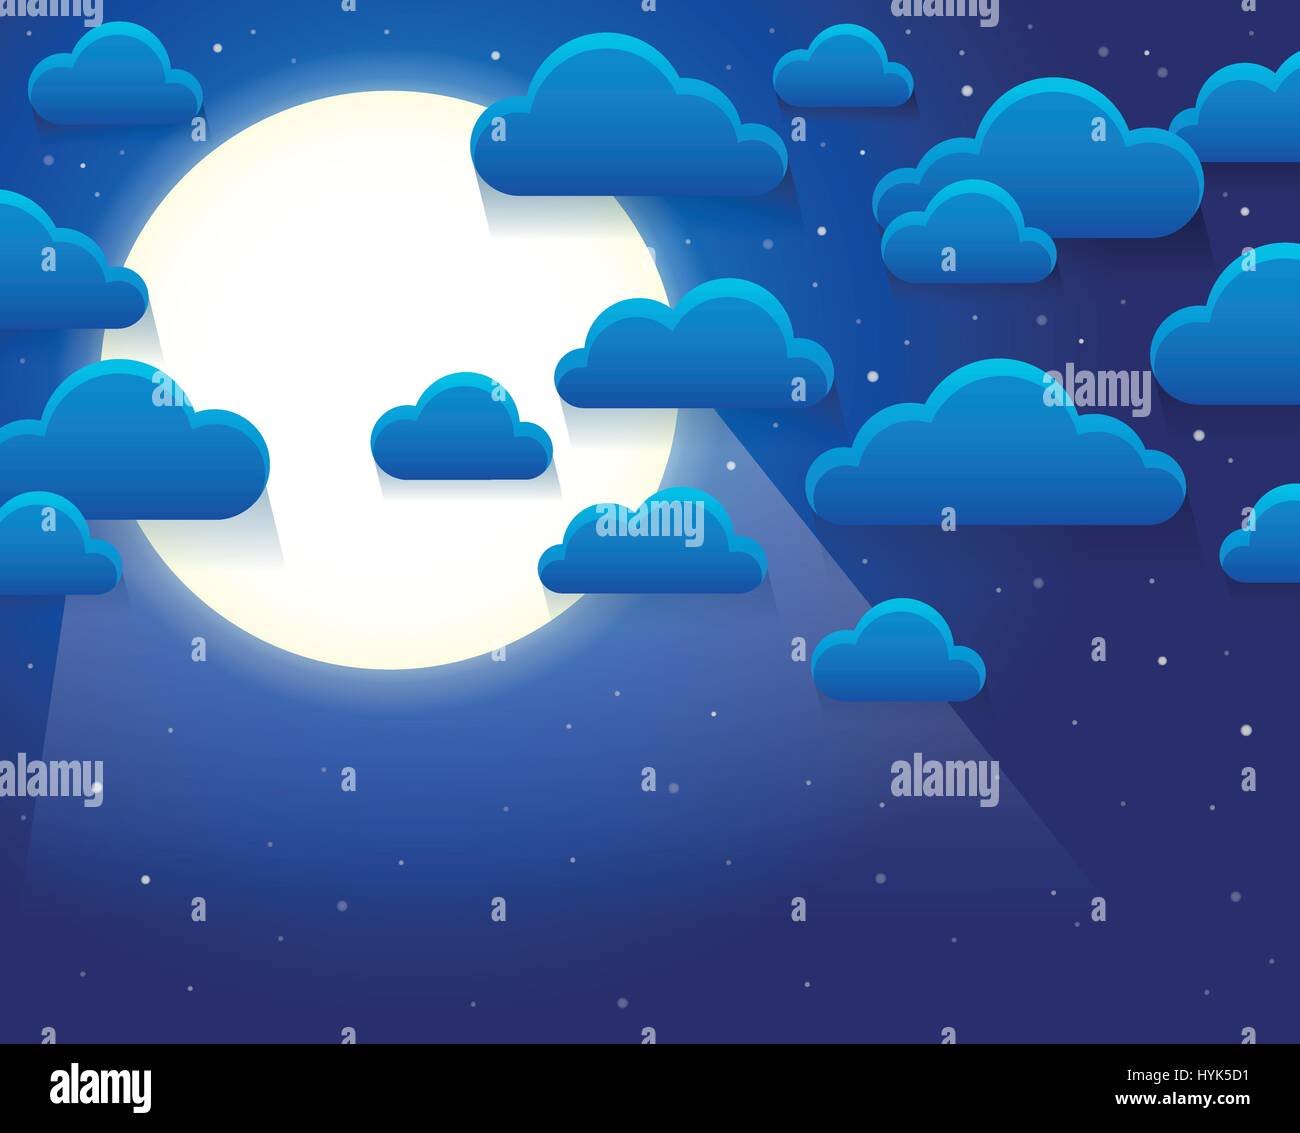 Night sky with stylized clouds theme 1 - eps10 vector illustration. Stock Vector